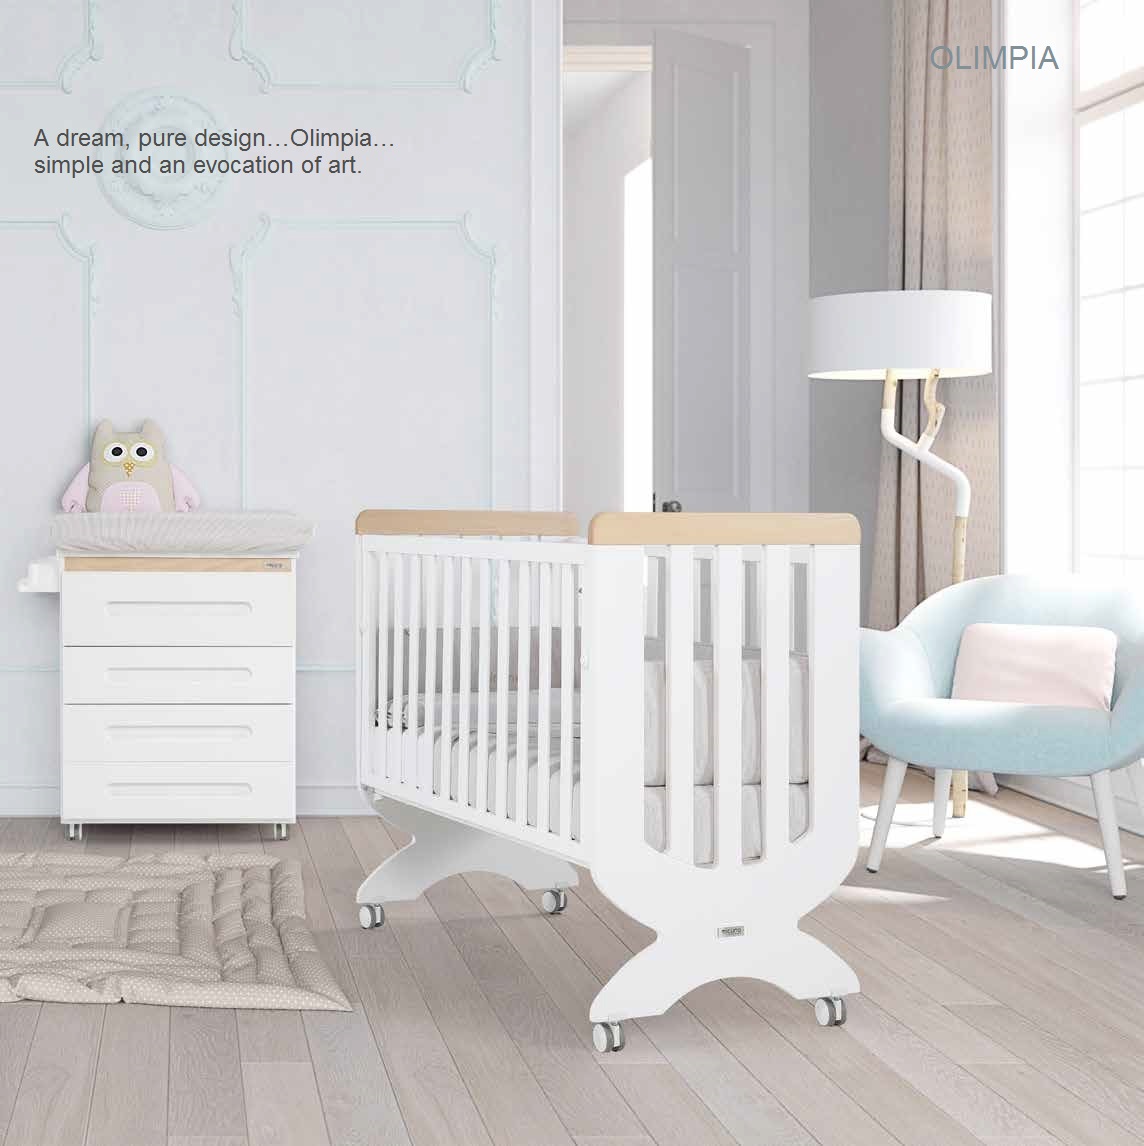 baby-fair Micuna Olimpia Baby Cot with Patented Relax System + 4 Inch Anti Dust Mite foam Mattress (Unique Double Locking Mechanism for Extra Safety) (Made in SPAIN)